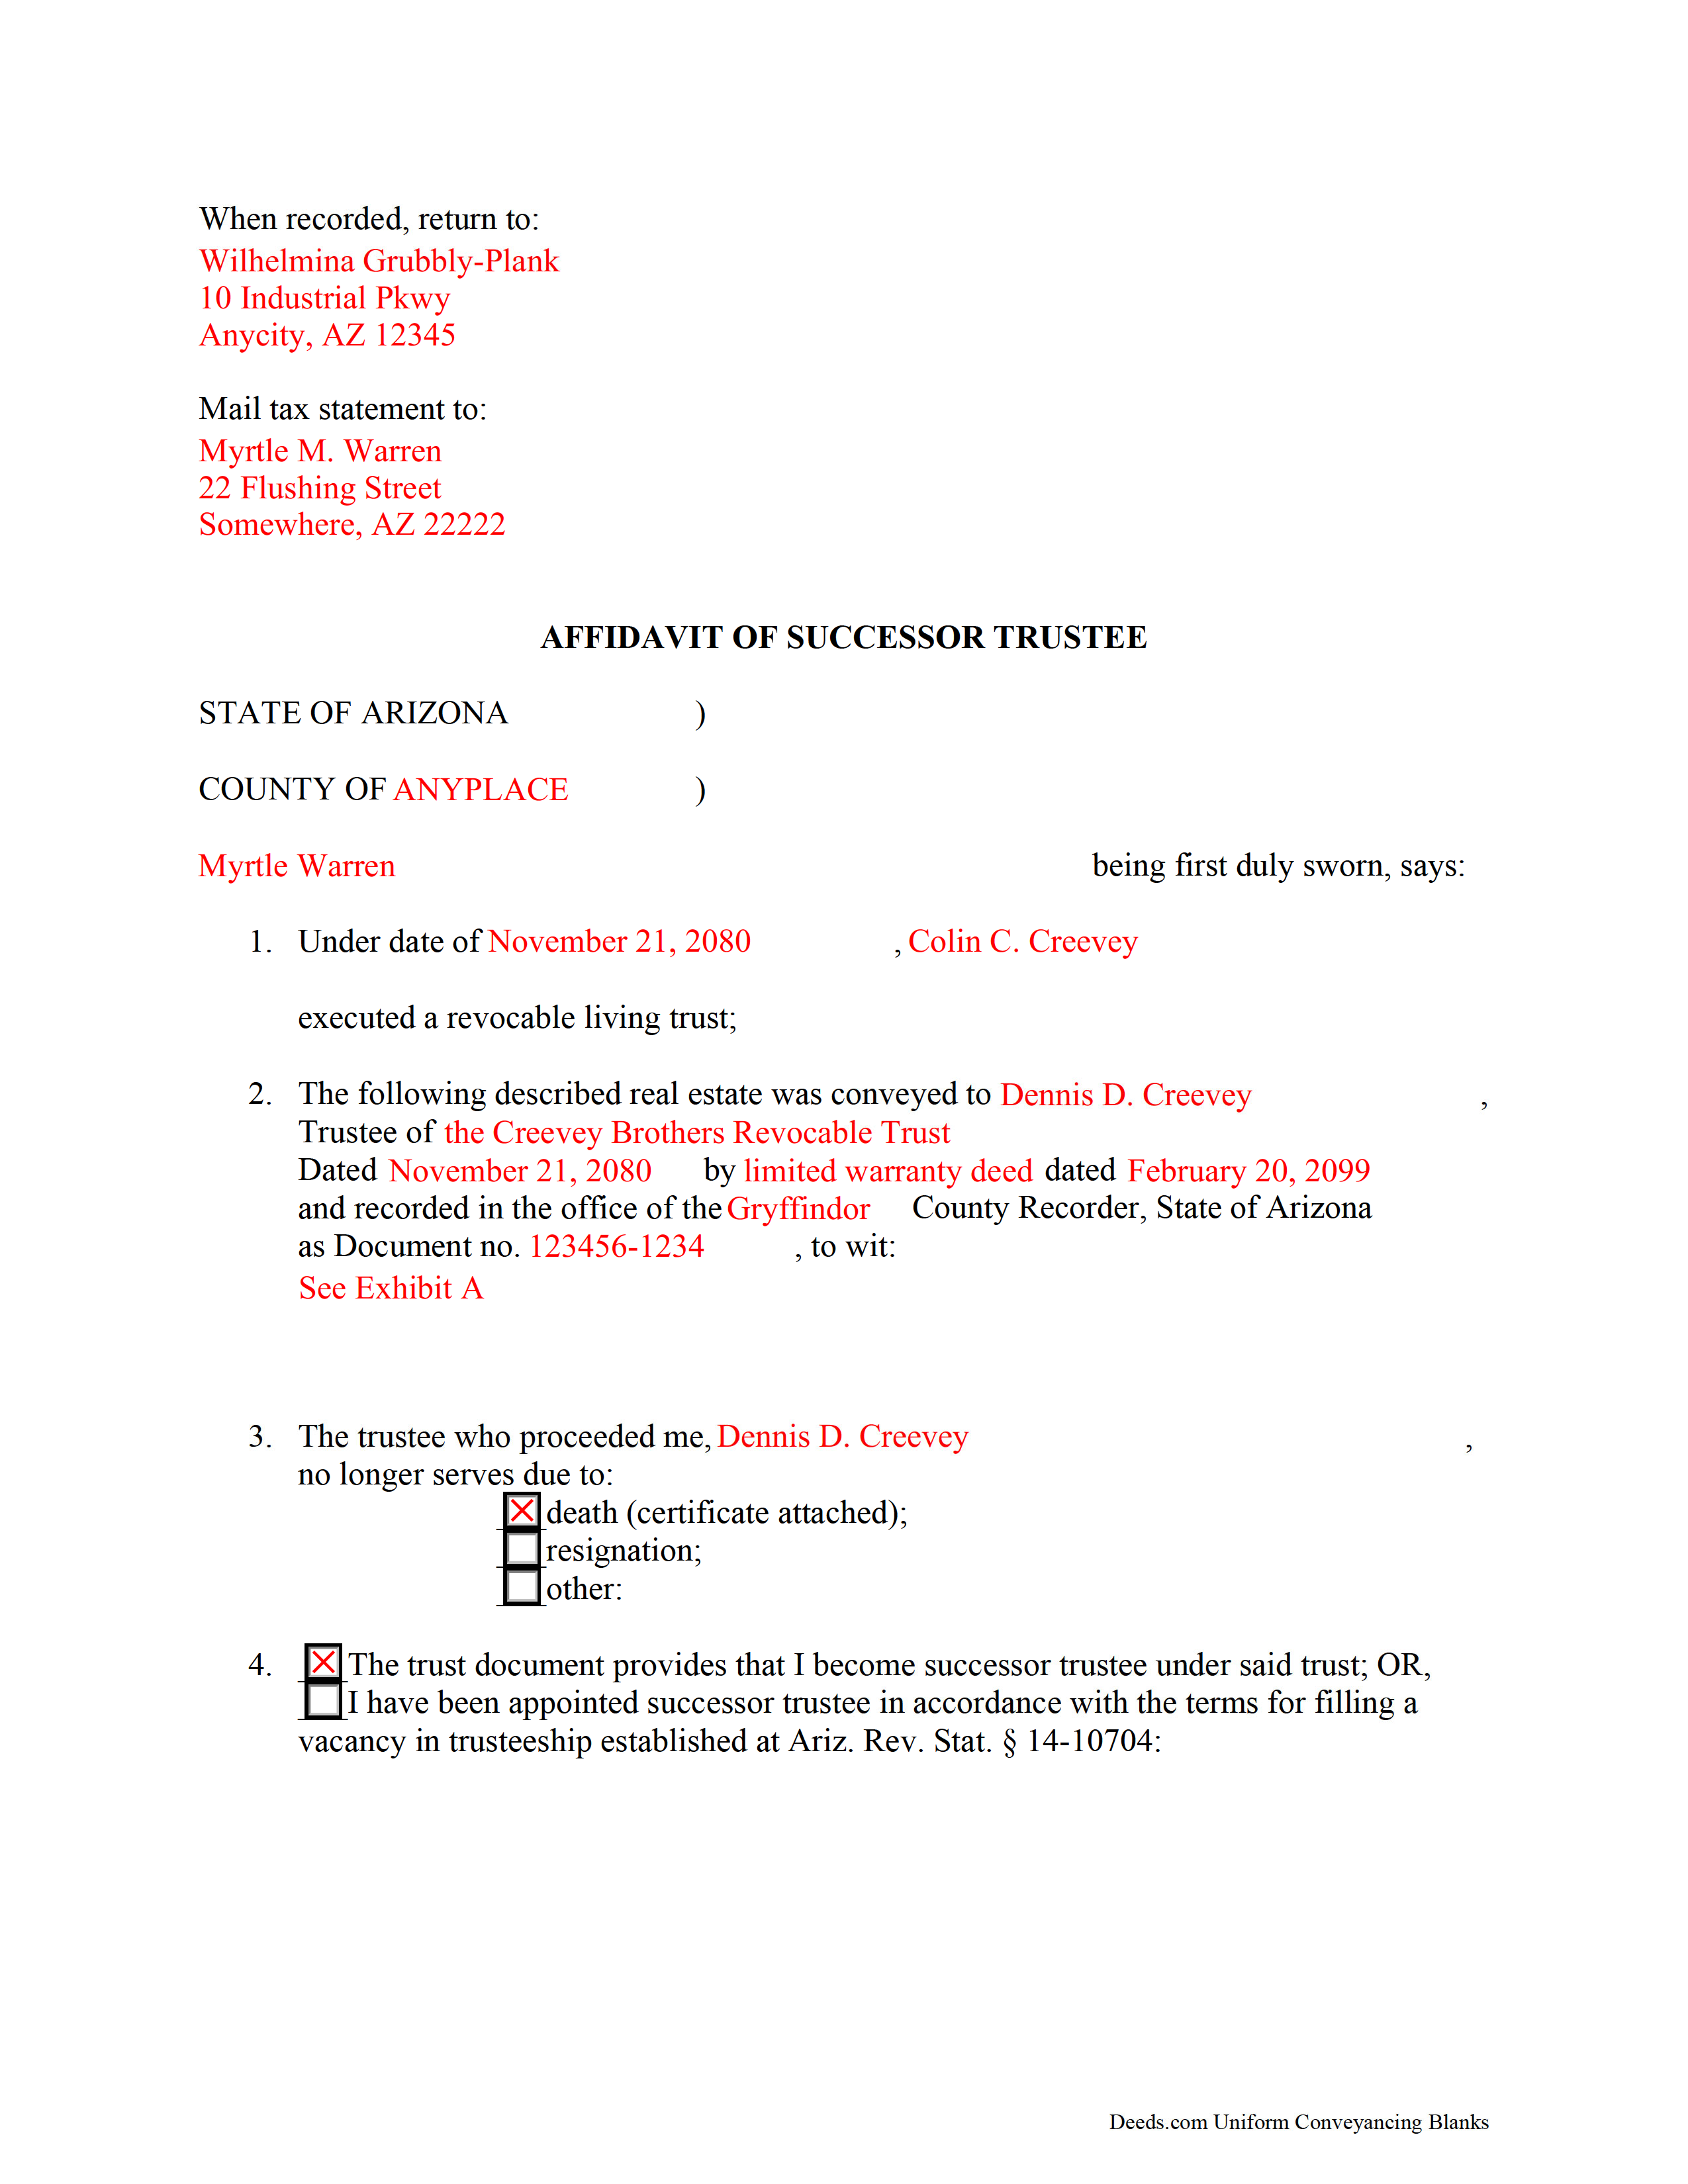 Completed Example of the Affidavit of Successor Trustee Document